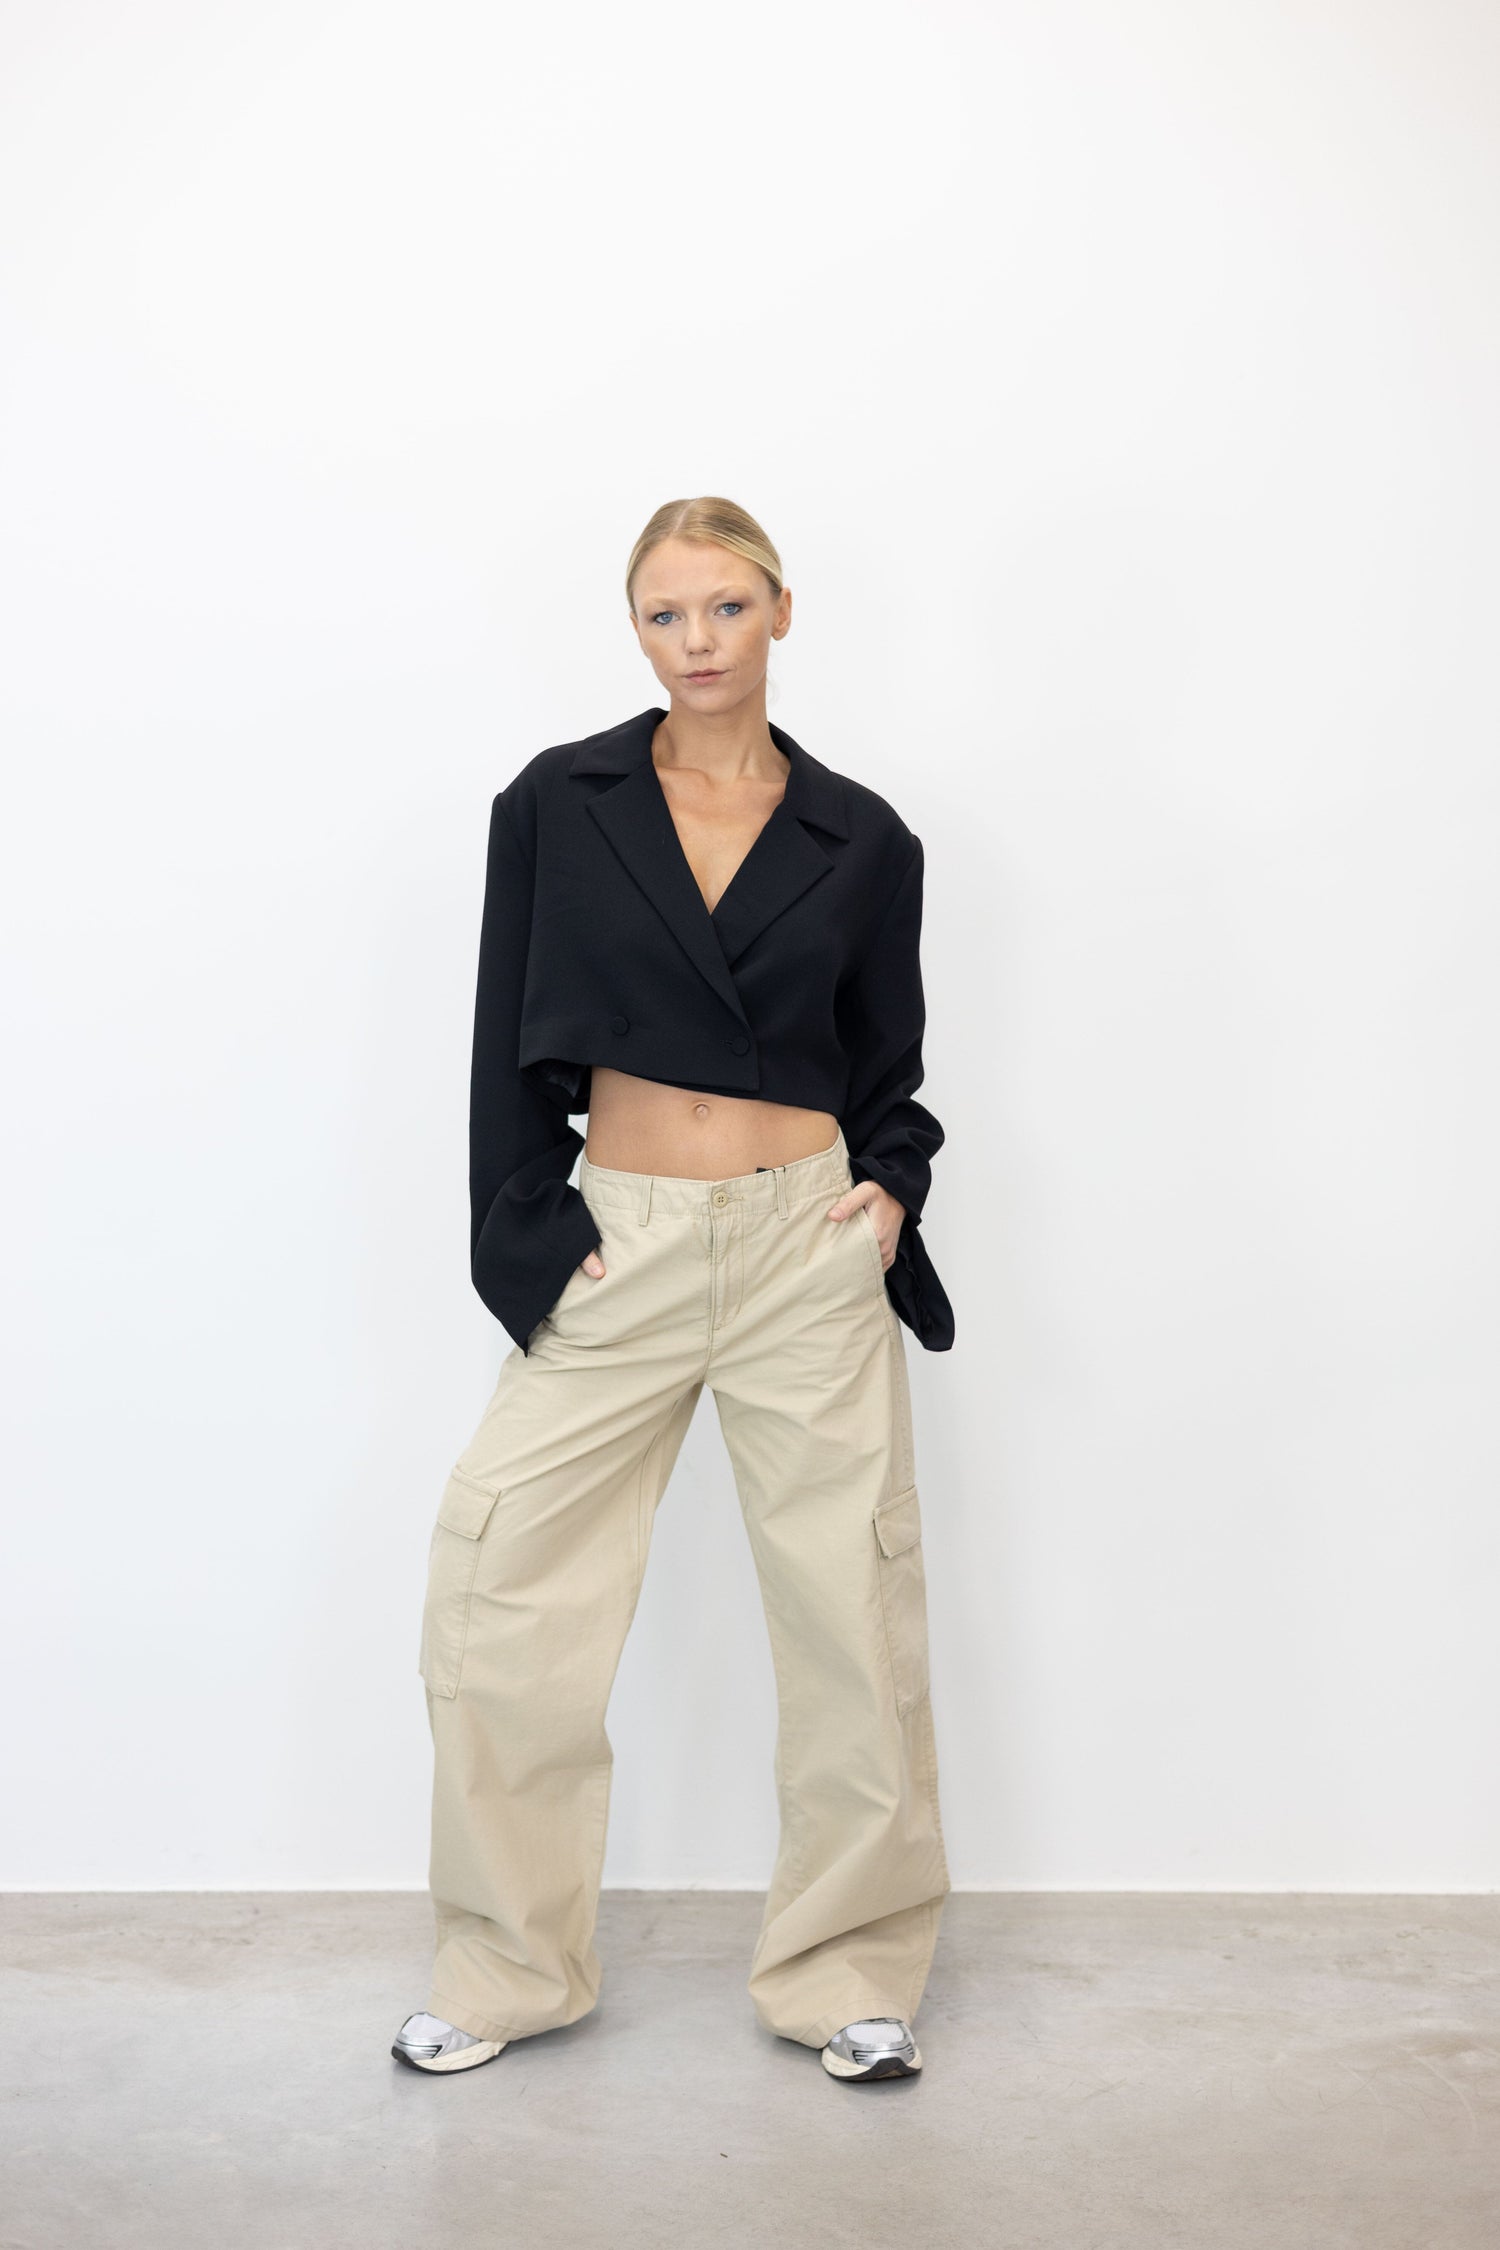 MID RISE BAGGY CARGO PANT CARGO LEVIS 